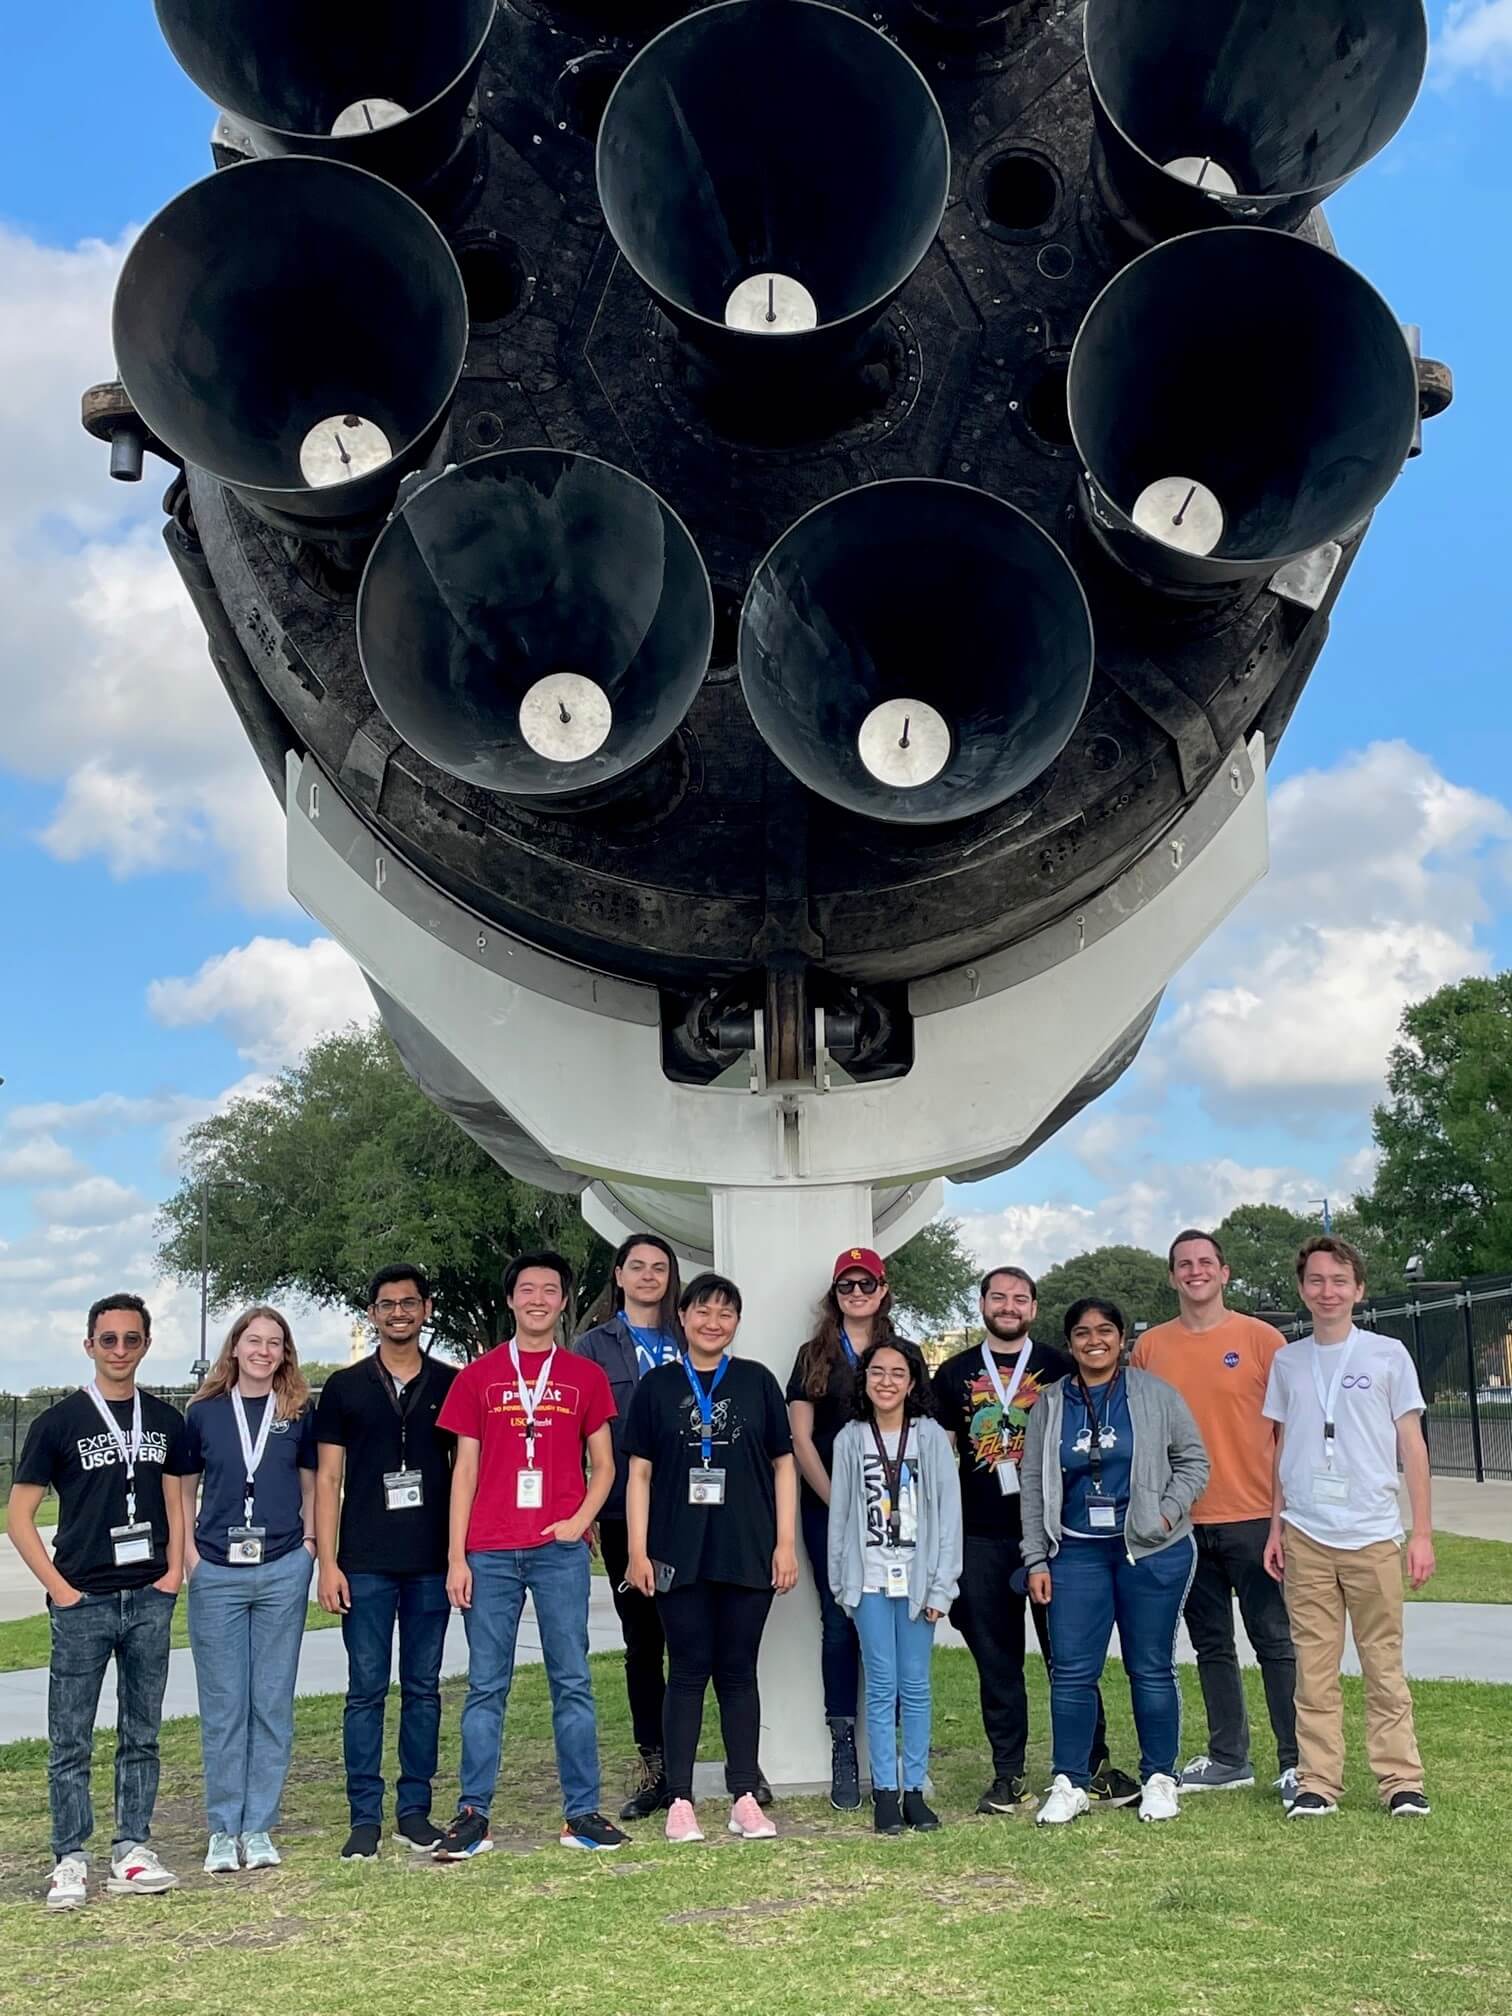 Team Aegis stands underneath one of the only two Falcon 9 boosters on display in the world, previously used in multiple missions to deliver supplies to the International Space Station.